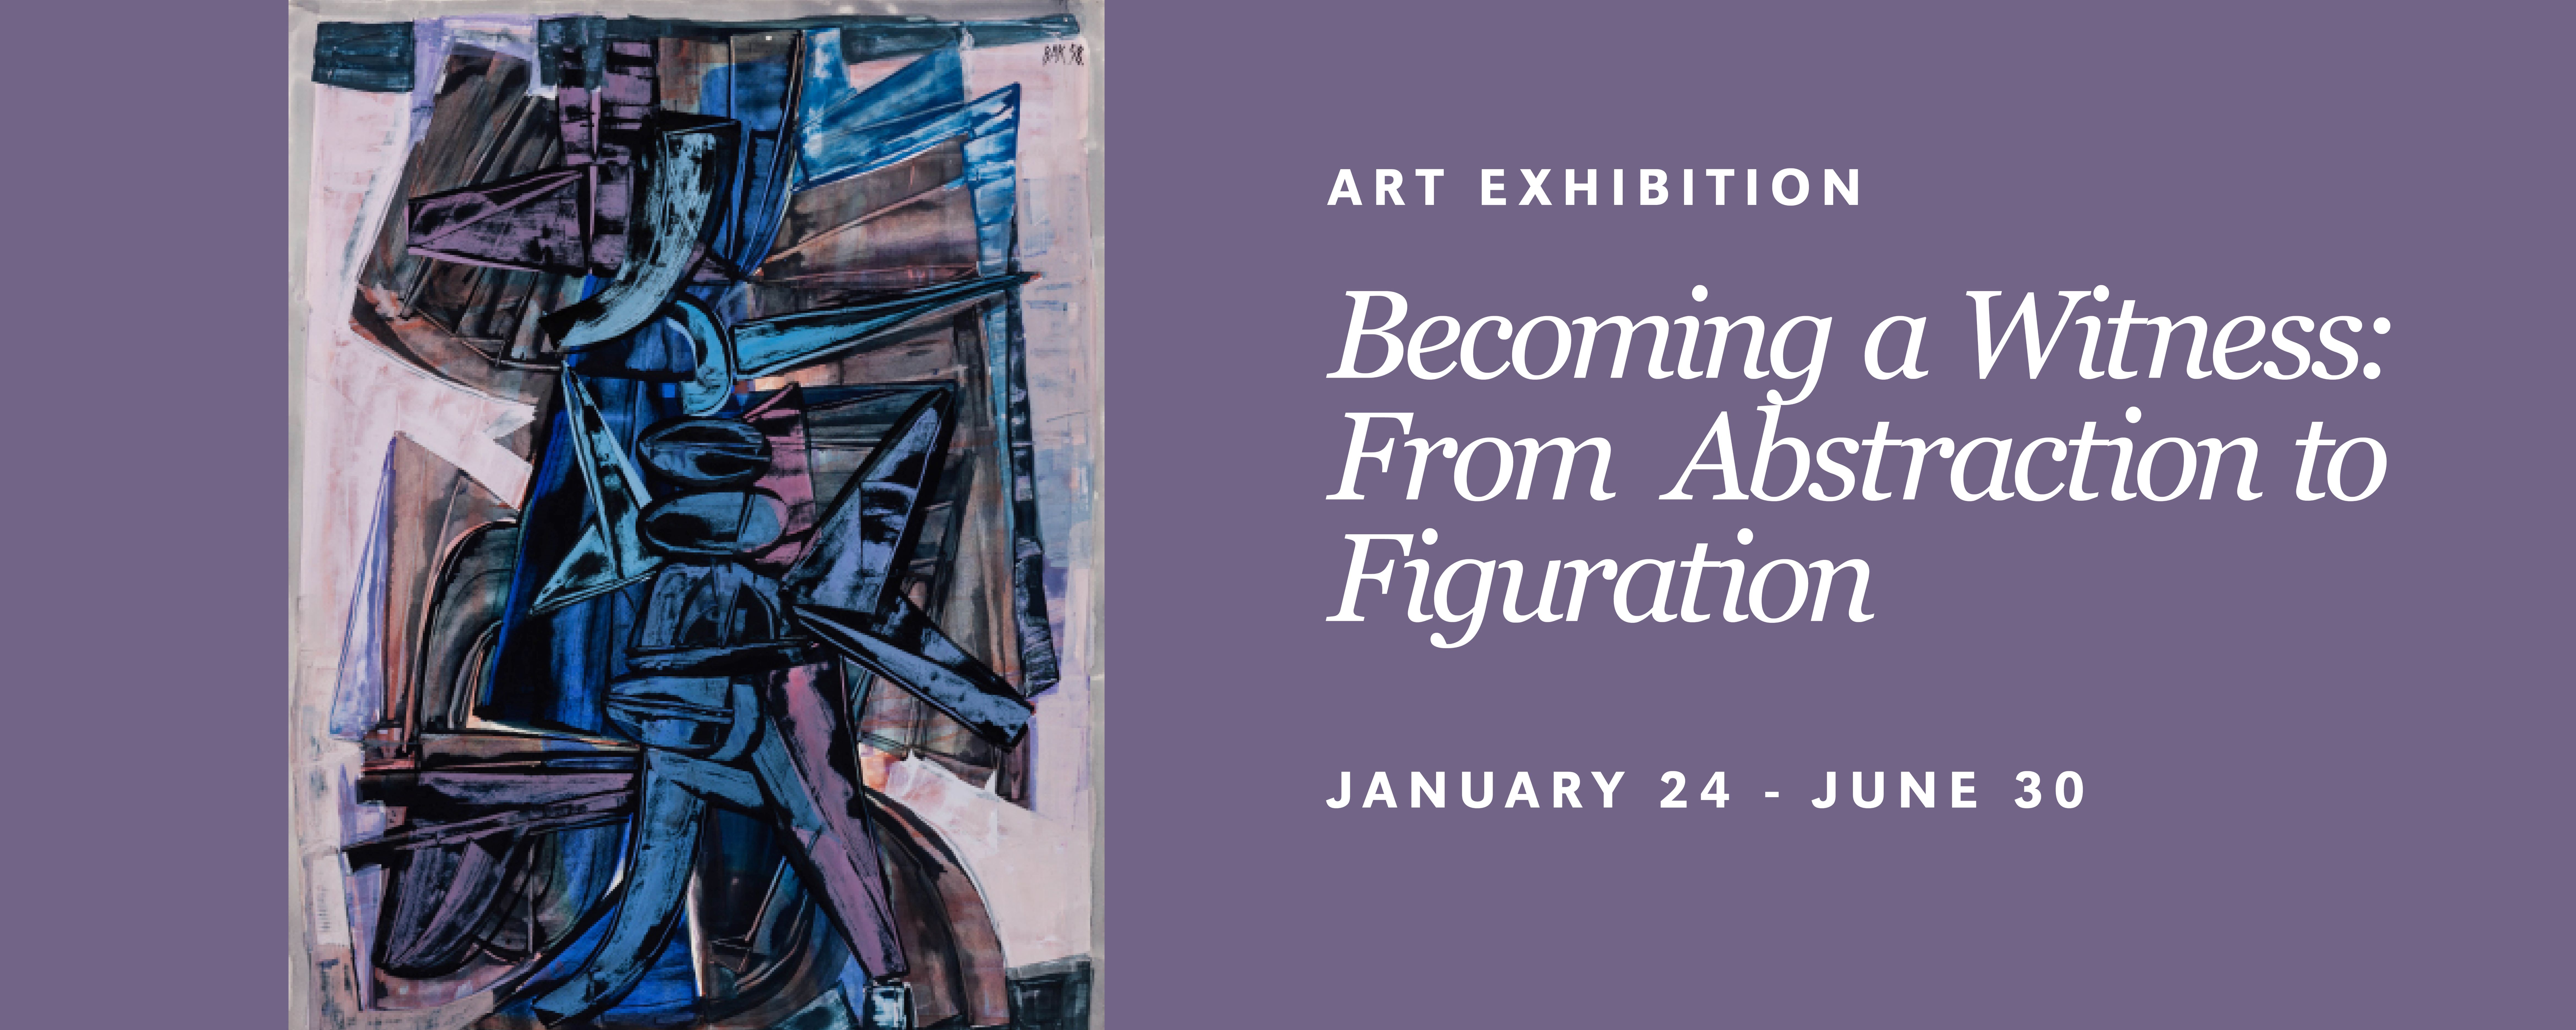 SMBLC Becoming A Witness Exhibition Banner. Purple background with white text: Becoming a Witness: From Abstraction to Figuration January 24 - June 30. Image of Bak's painting "Marching"